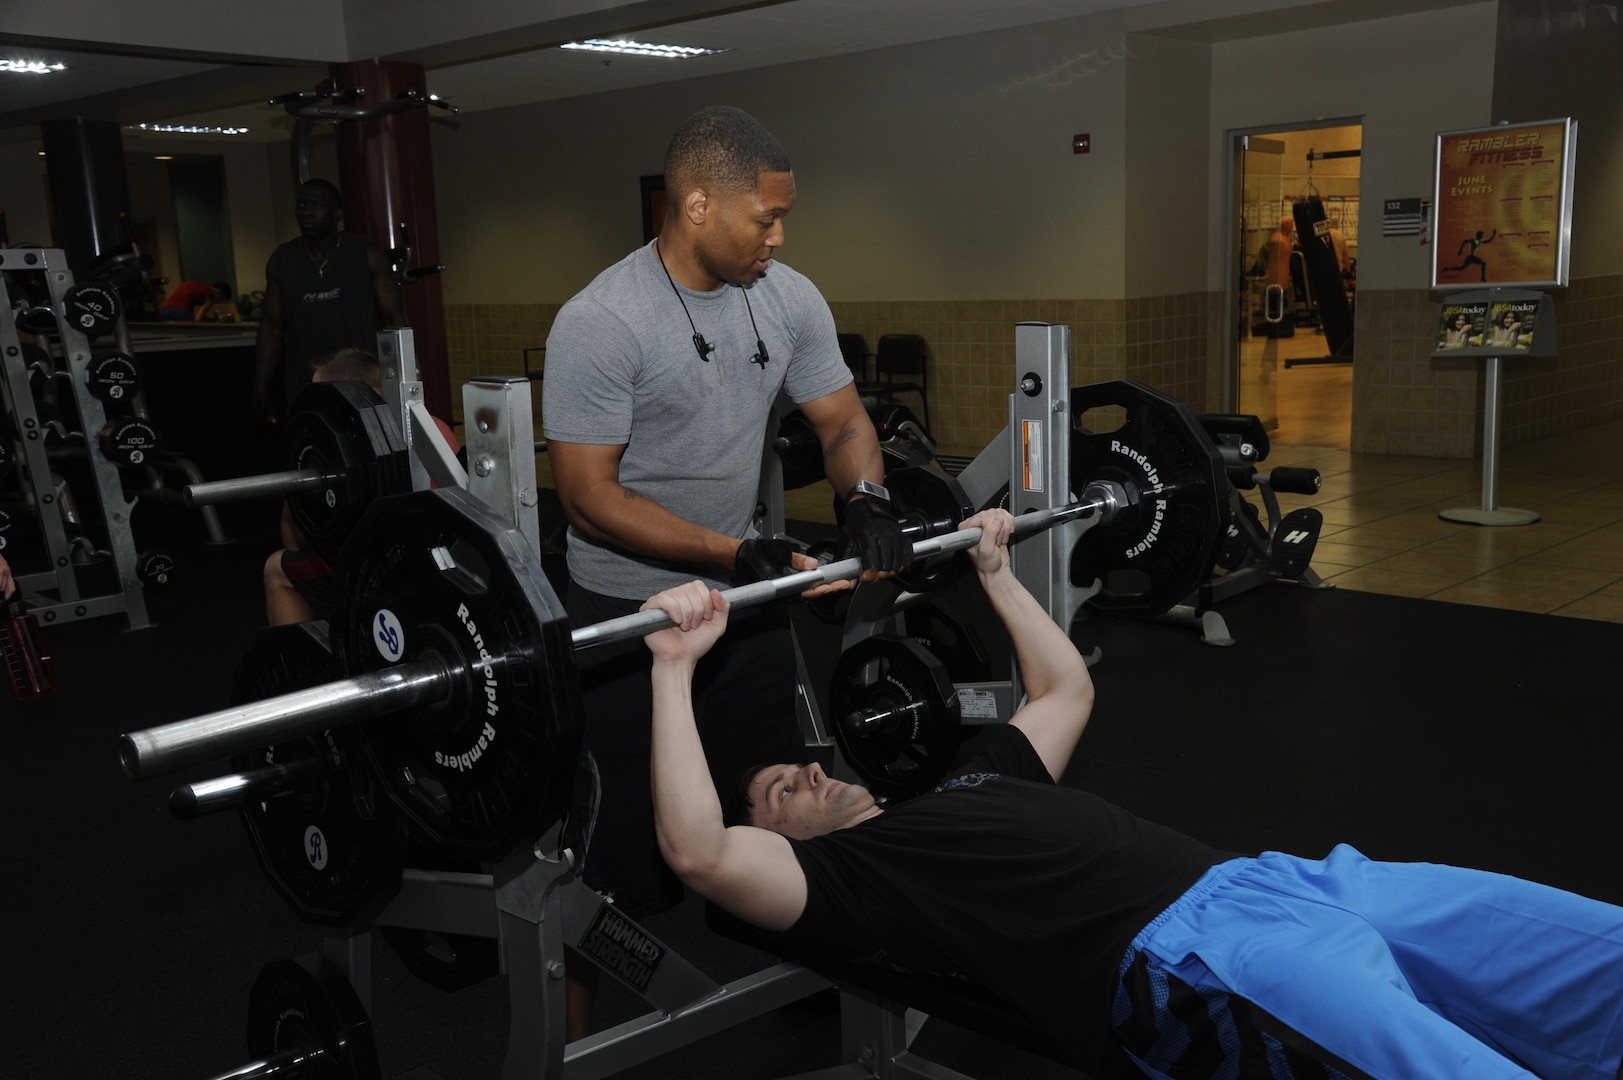 Tech. Sgt. Damien Mount (standing), 502nd Communications Squadron client service supervisor, and Senior Airman Matthew Whitton, 502nd CS client systems technician, work out on the bench presses June 23 at the Joint Base San Antonio-Randolph Rambler Fitness Center.